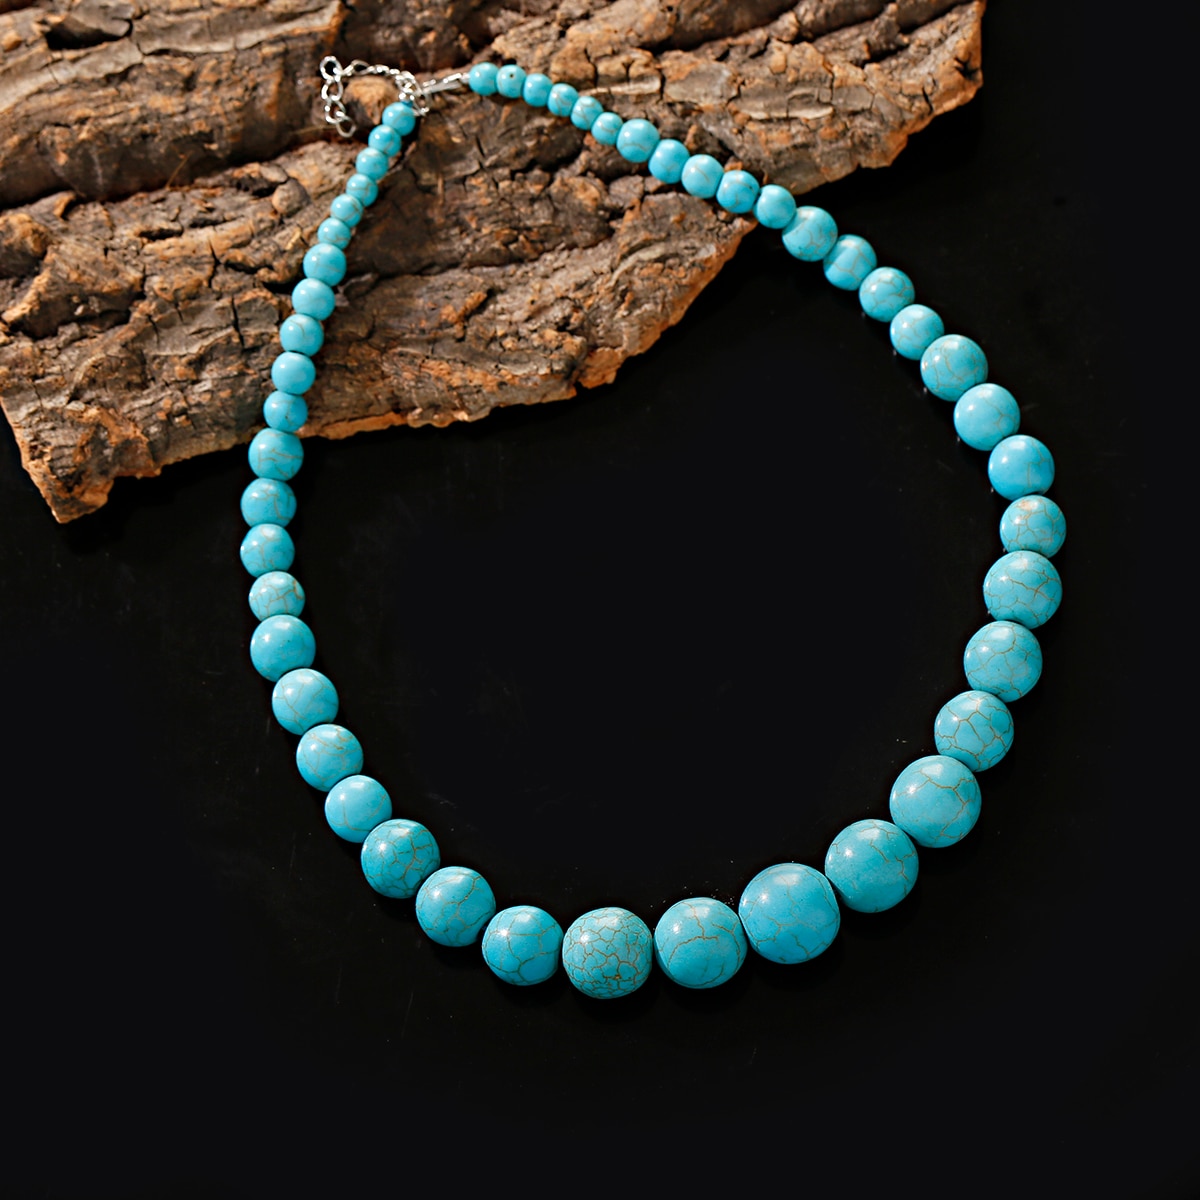 2022-Gypsy-Boho-Round-Turquoises-Necklace-For-Women-Collares-Statement-Jewelry-Indian-Necklaces-Pend-1005004708964928-2